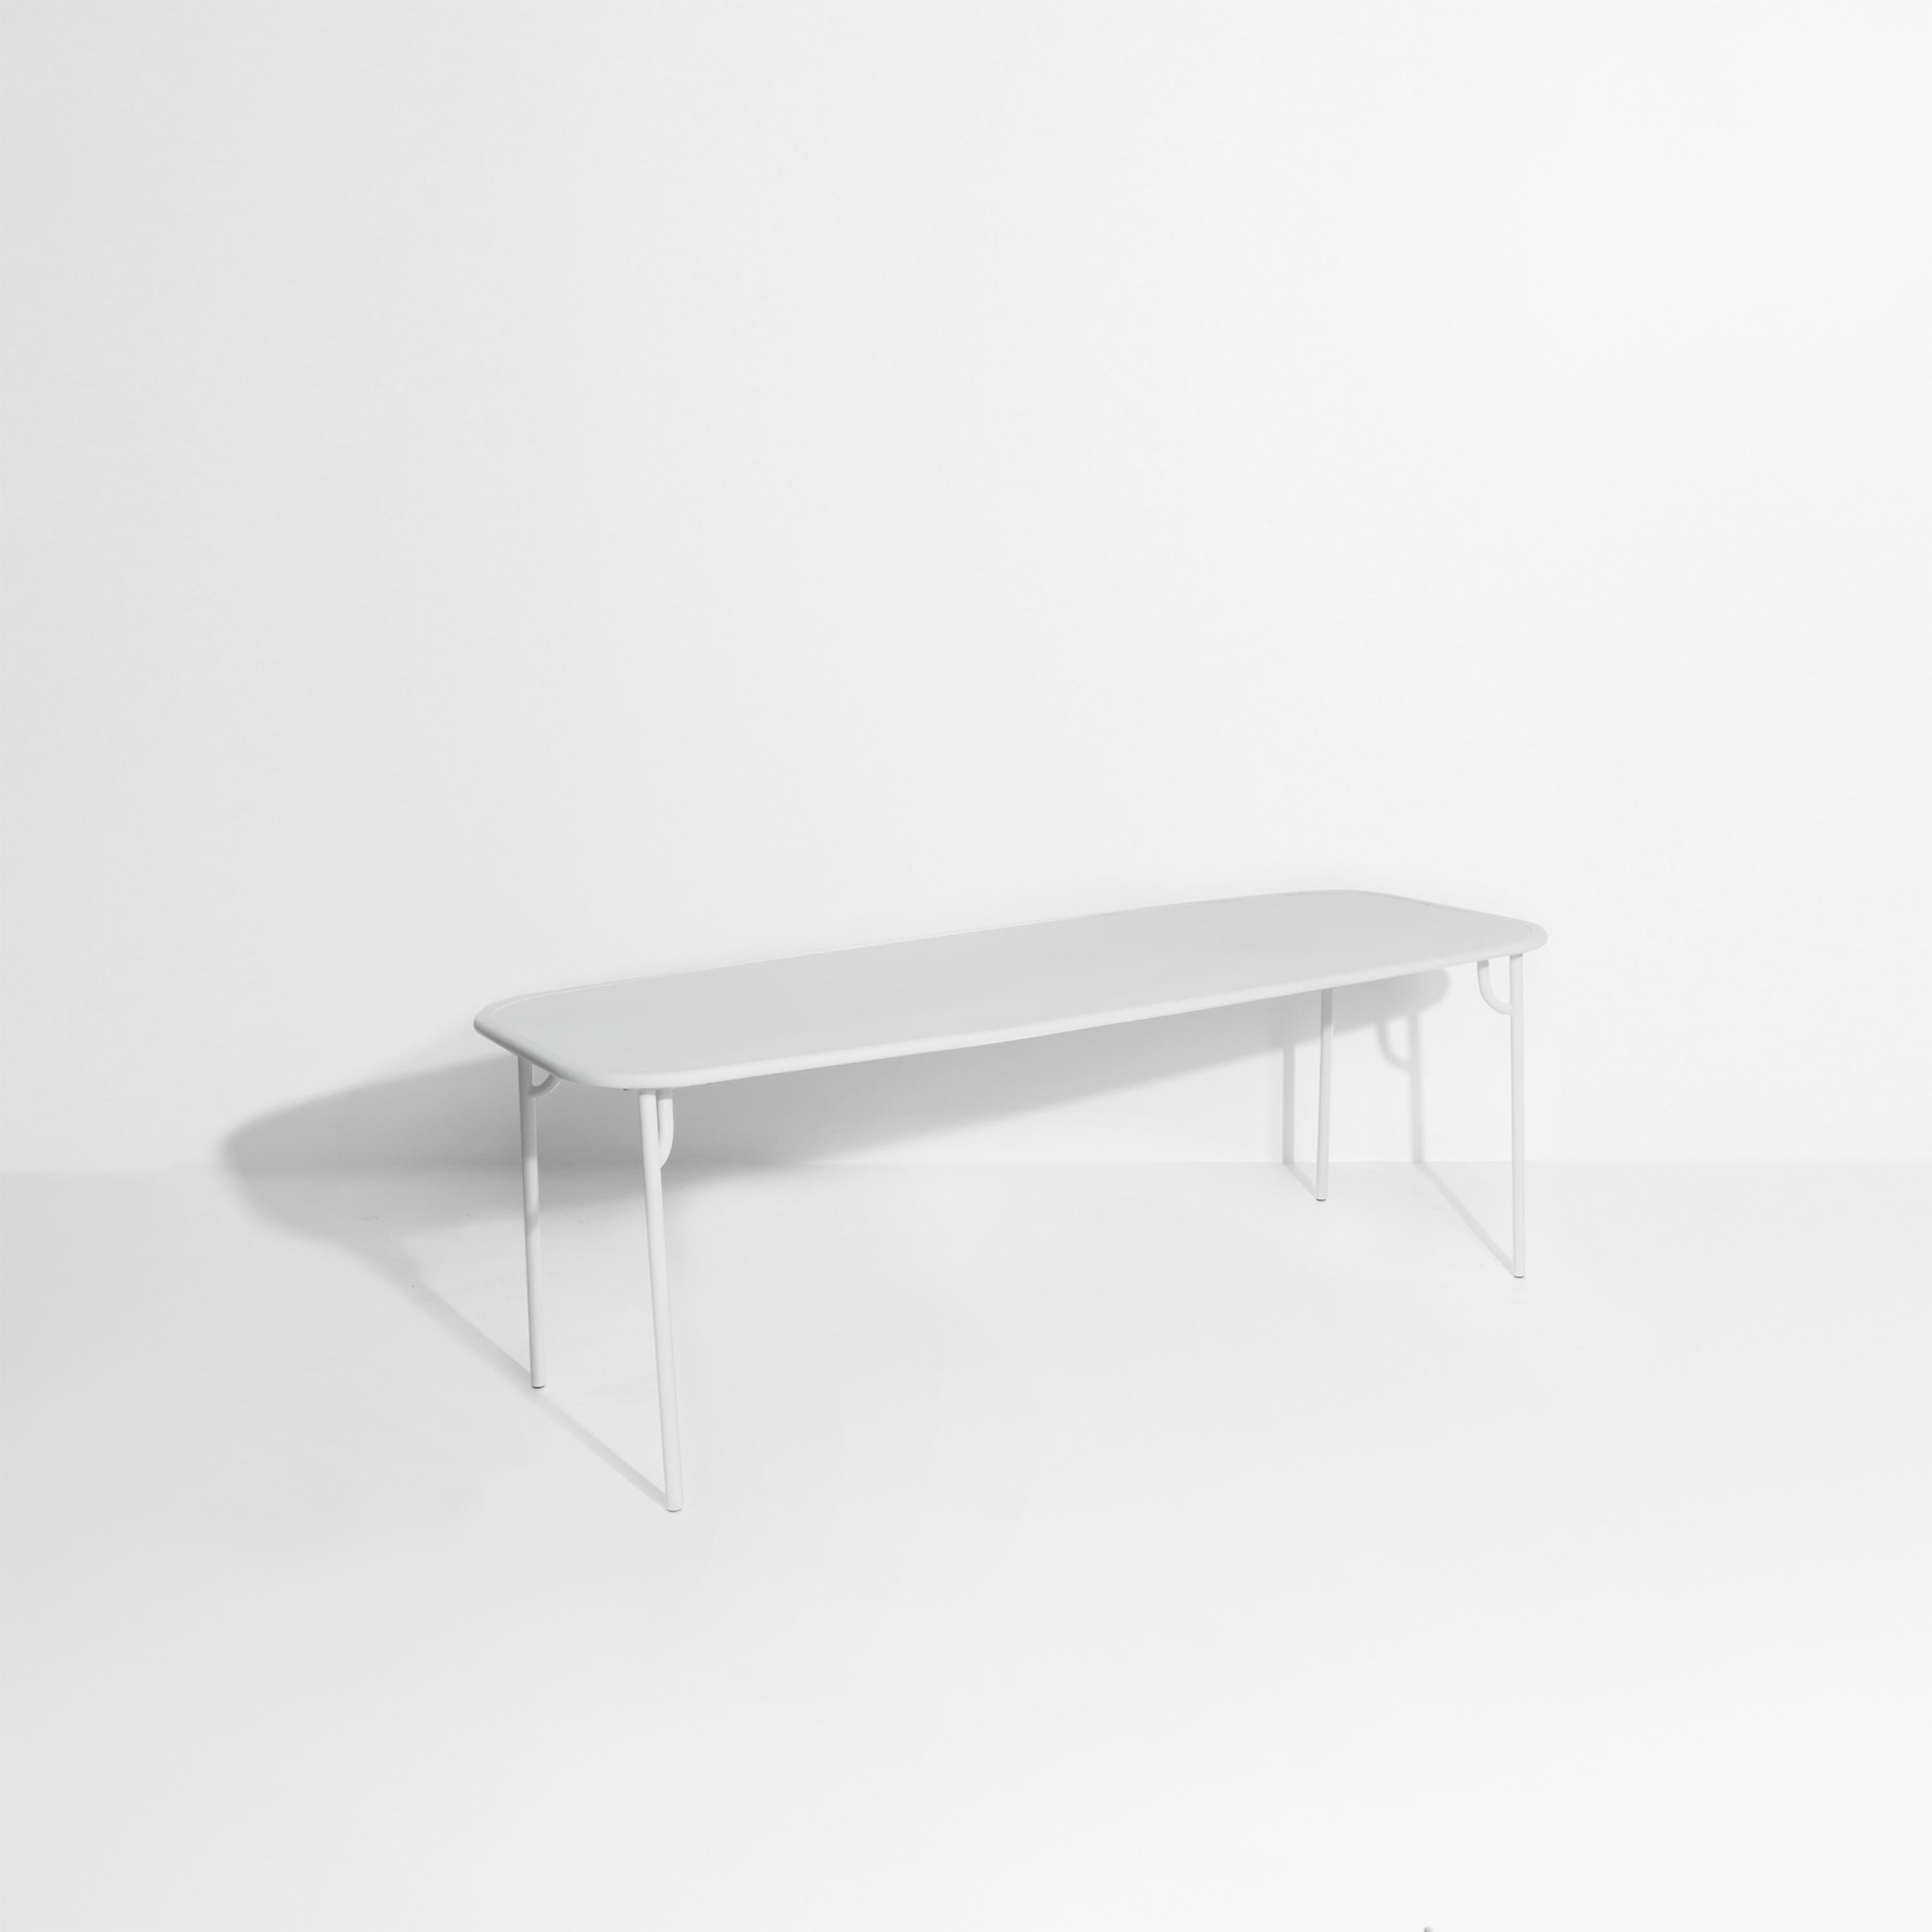 Petite Friture Week-End Large Plain Rectangular Dining Table in Pearl Grey Aluminium by Studio BrichetZiegler, 2017

The week-end collection is a full range of outdoor furniture, in aluminium grained epoxy paint, matt finish, that includes 18